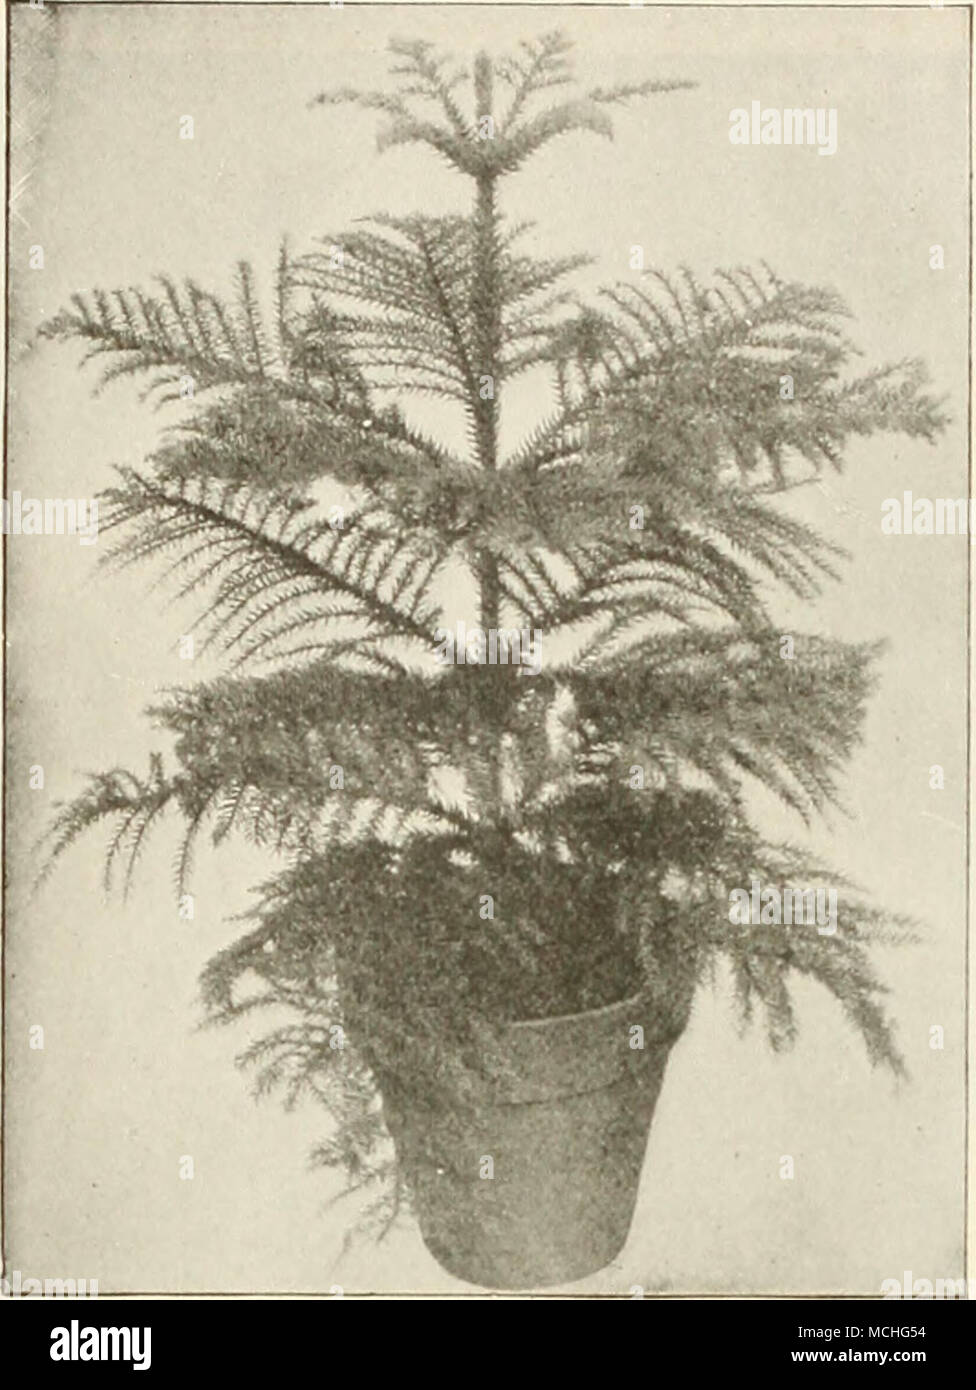 . Araucaria (Norfolk Island Pine) AraUCaria (Norfolk island Pine) Excelsa. One of the very popular decorative plants which has been practically unobtainable since the importation of plants from foreign countries has been prohibited. We are pleased to be able to offer a limited stock of American grown plants. 4-inch pots, 6 to 7 inches high, $1.00 each; 6-inch pots, 12 to 15 inches high, $3.00 each. Asparagus Plumosus Nanus (AspjraxHs Fcm). There is no better plant for table decoration than this. The foliage is more delicate than that of the finest Fern, being lace-like in its filminess. A plan Stock Photo